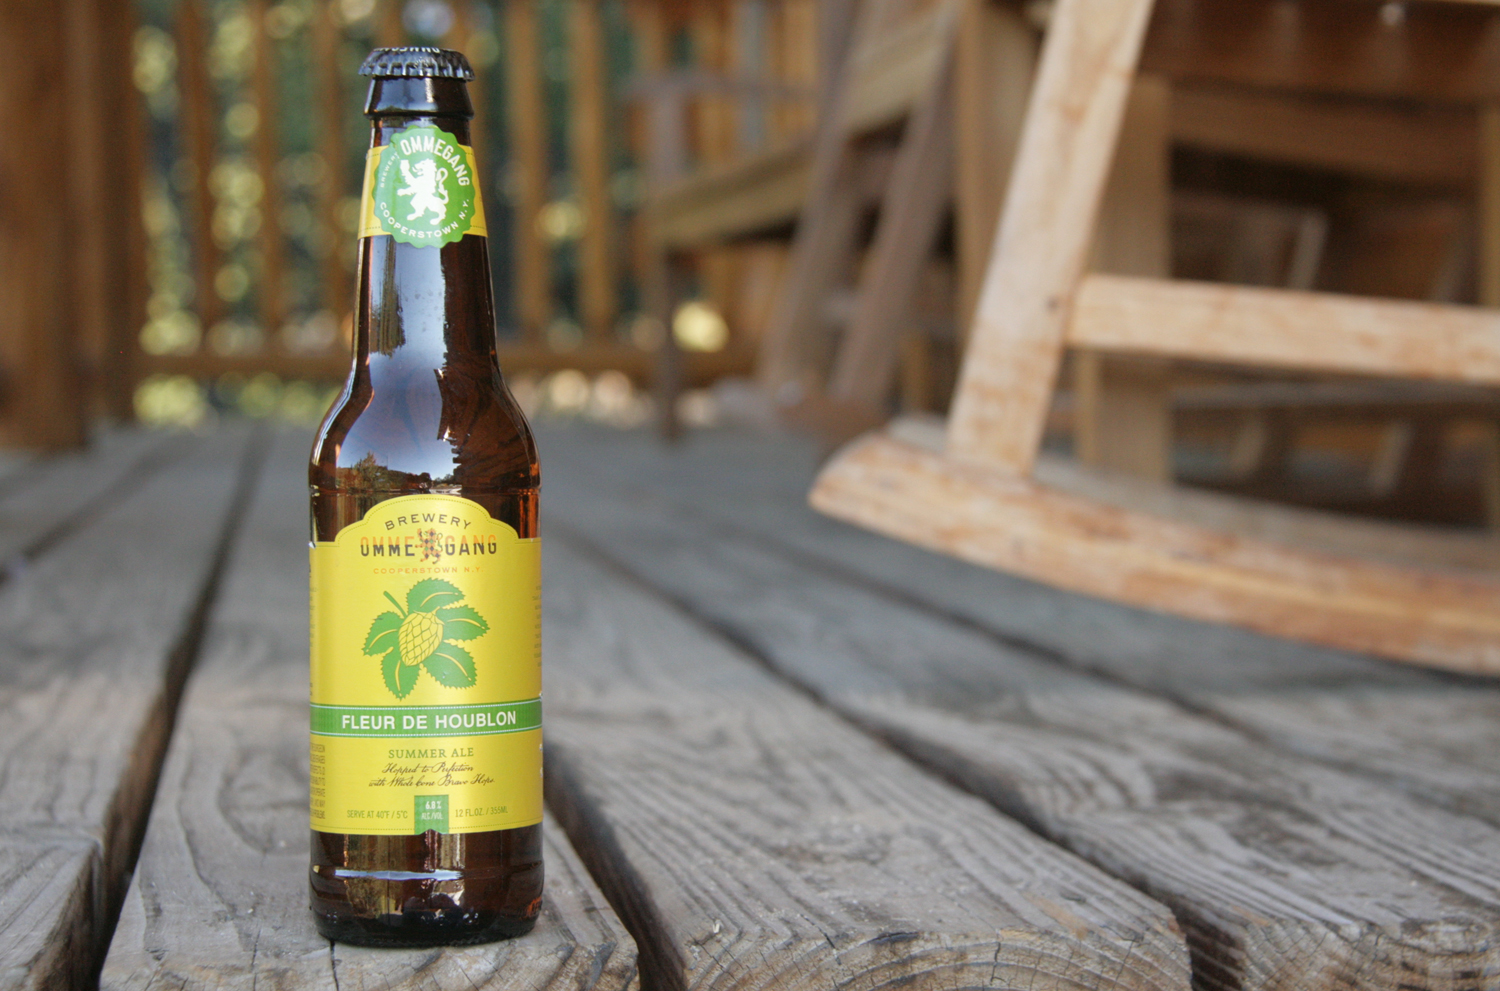 Ommegang Fleur De Houblon is a great summer beer for sipping.